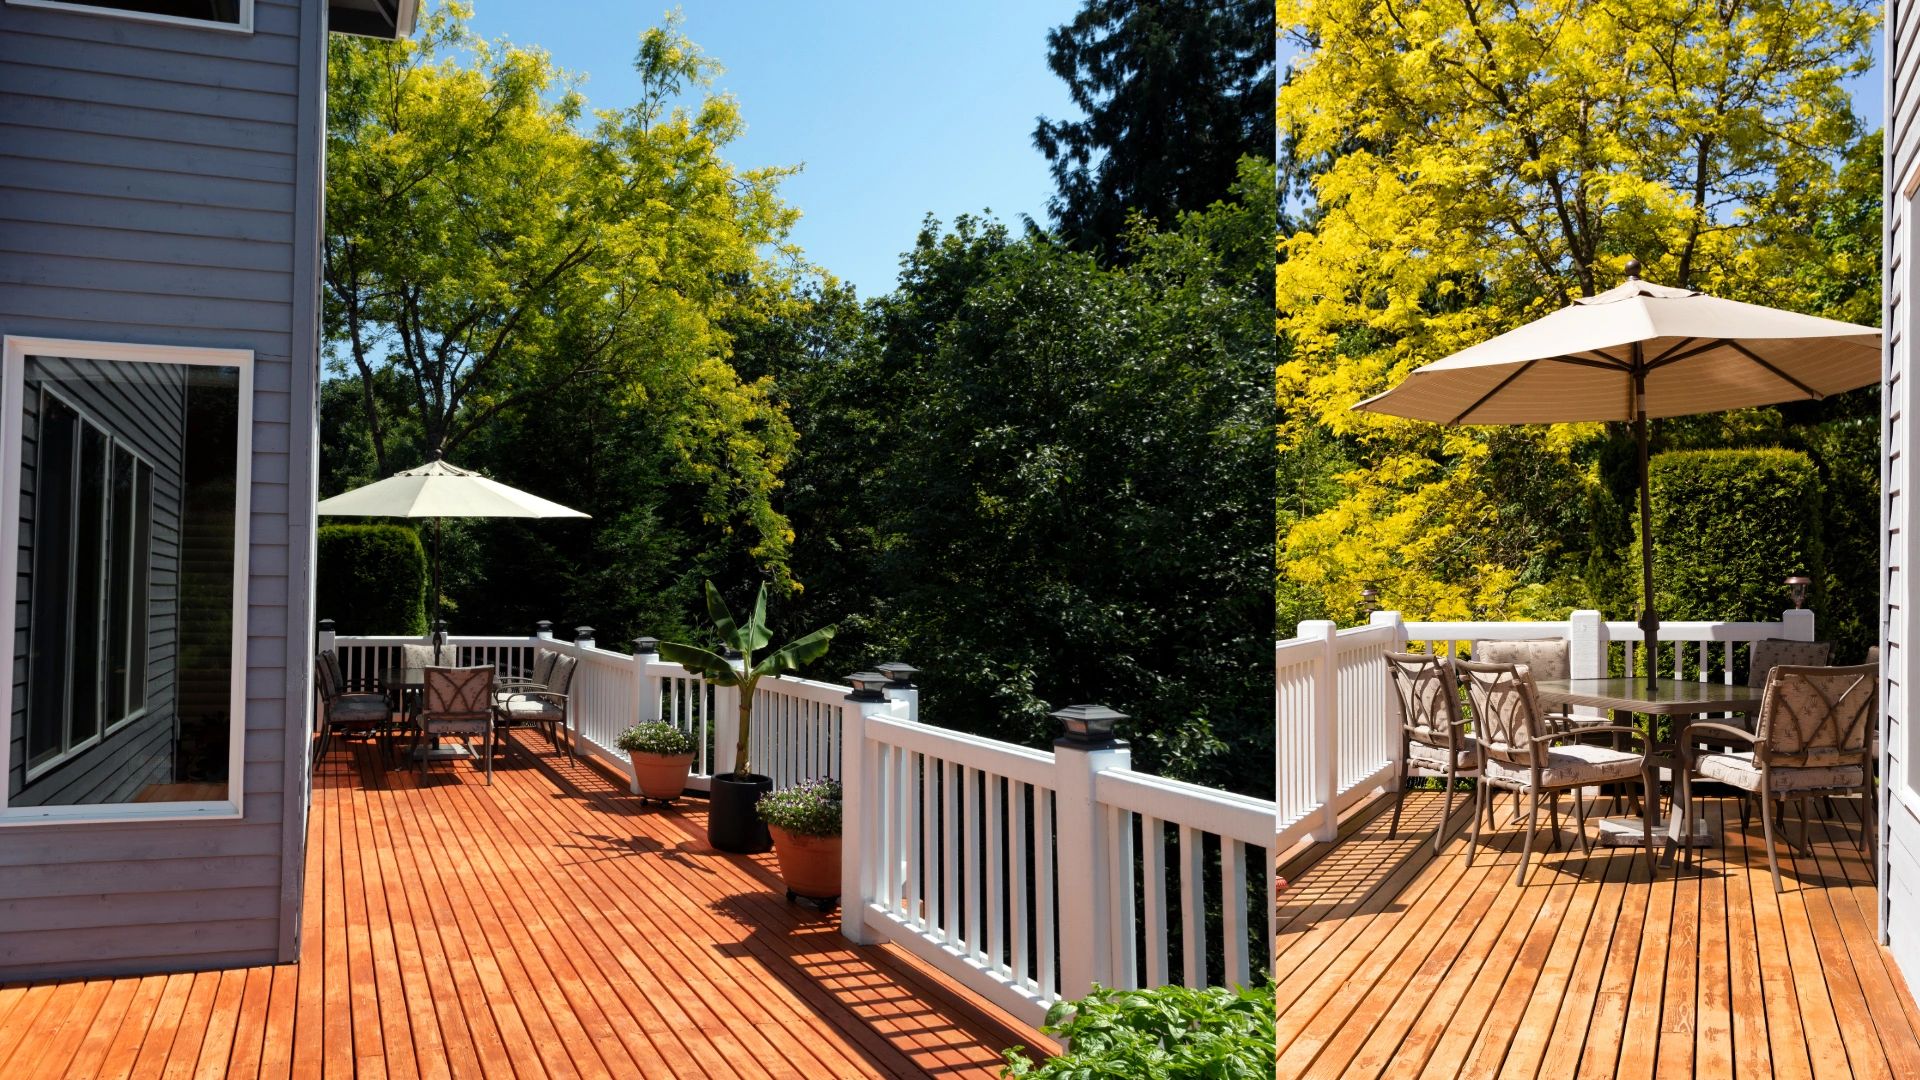 Luxury decks outdoors with fencing and patio